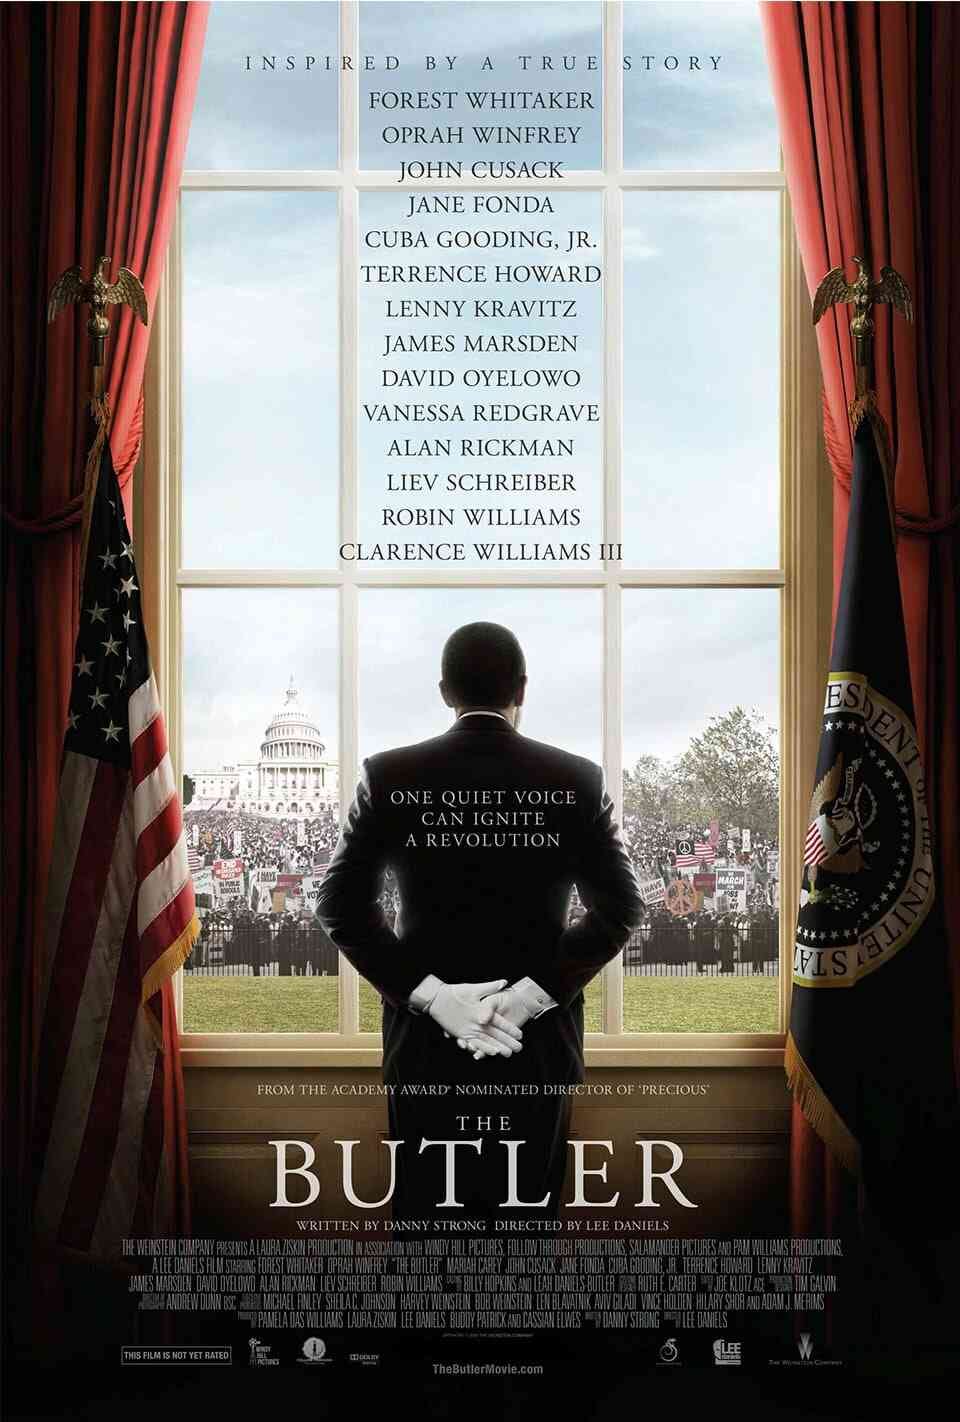 Read The Butler screenplay (poster)